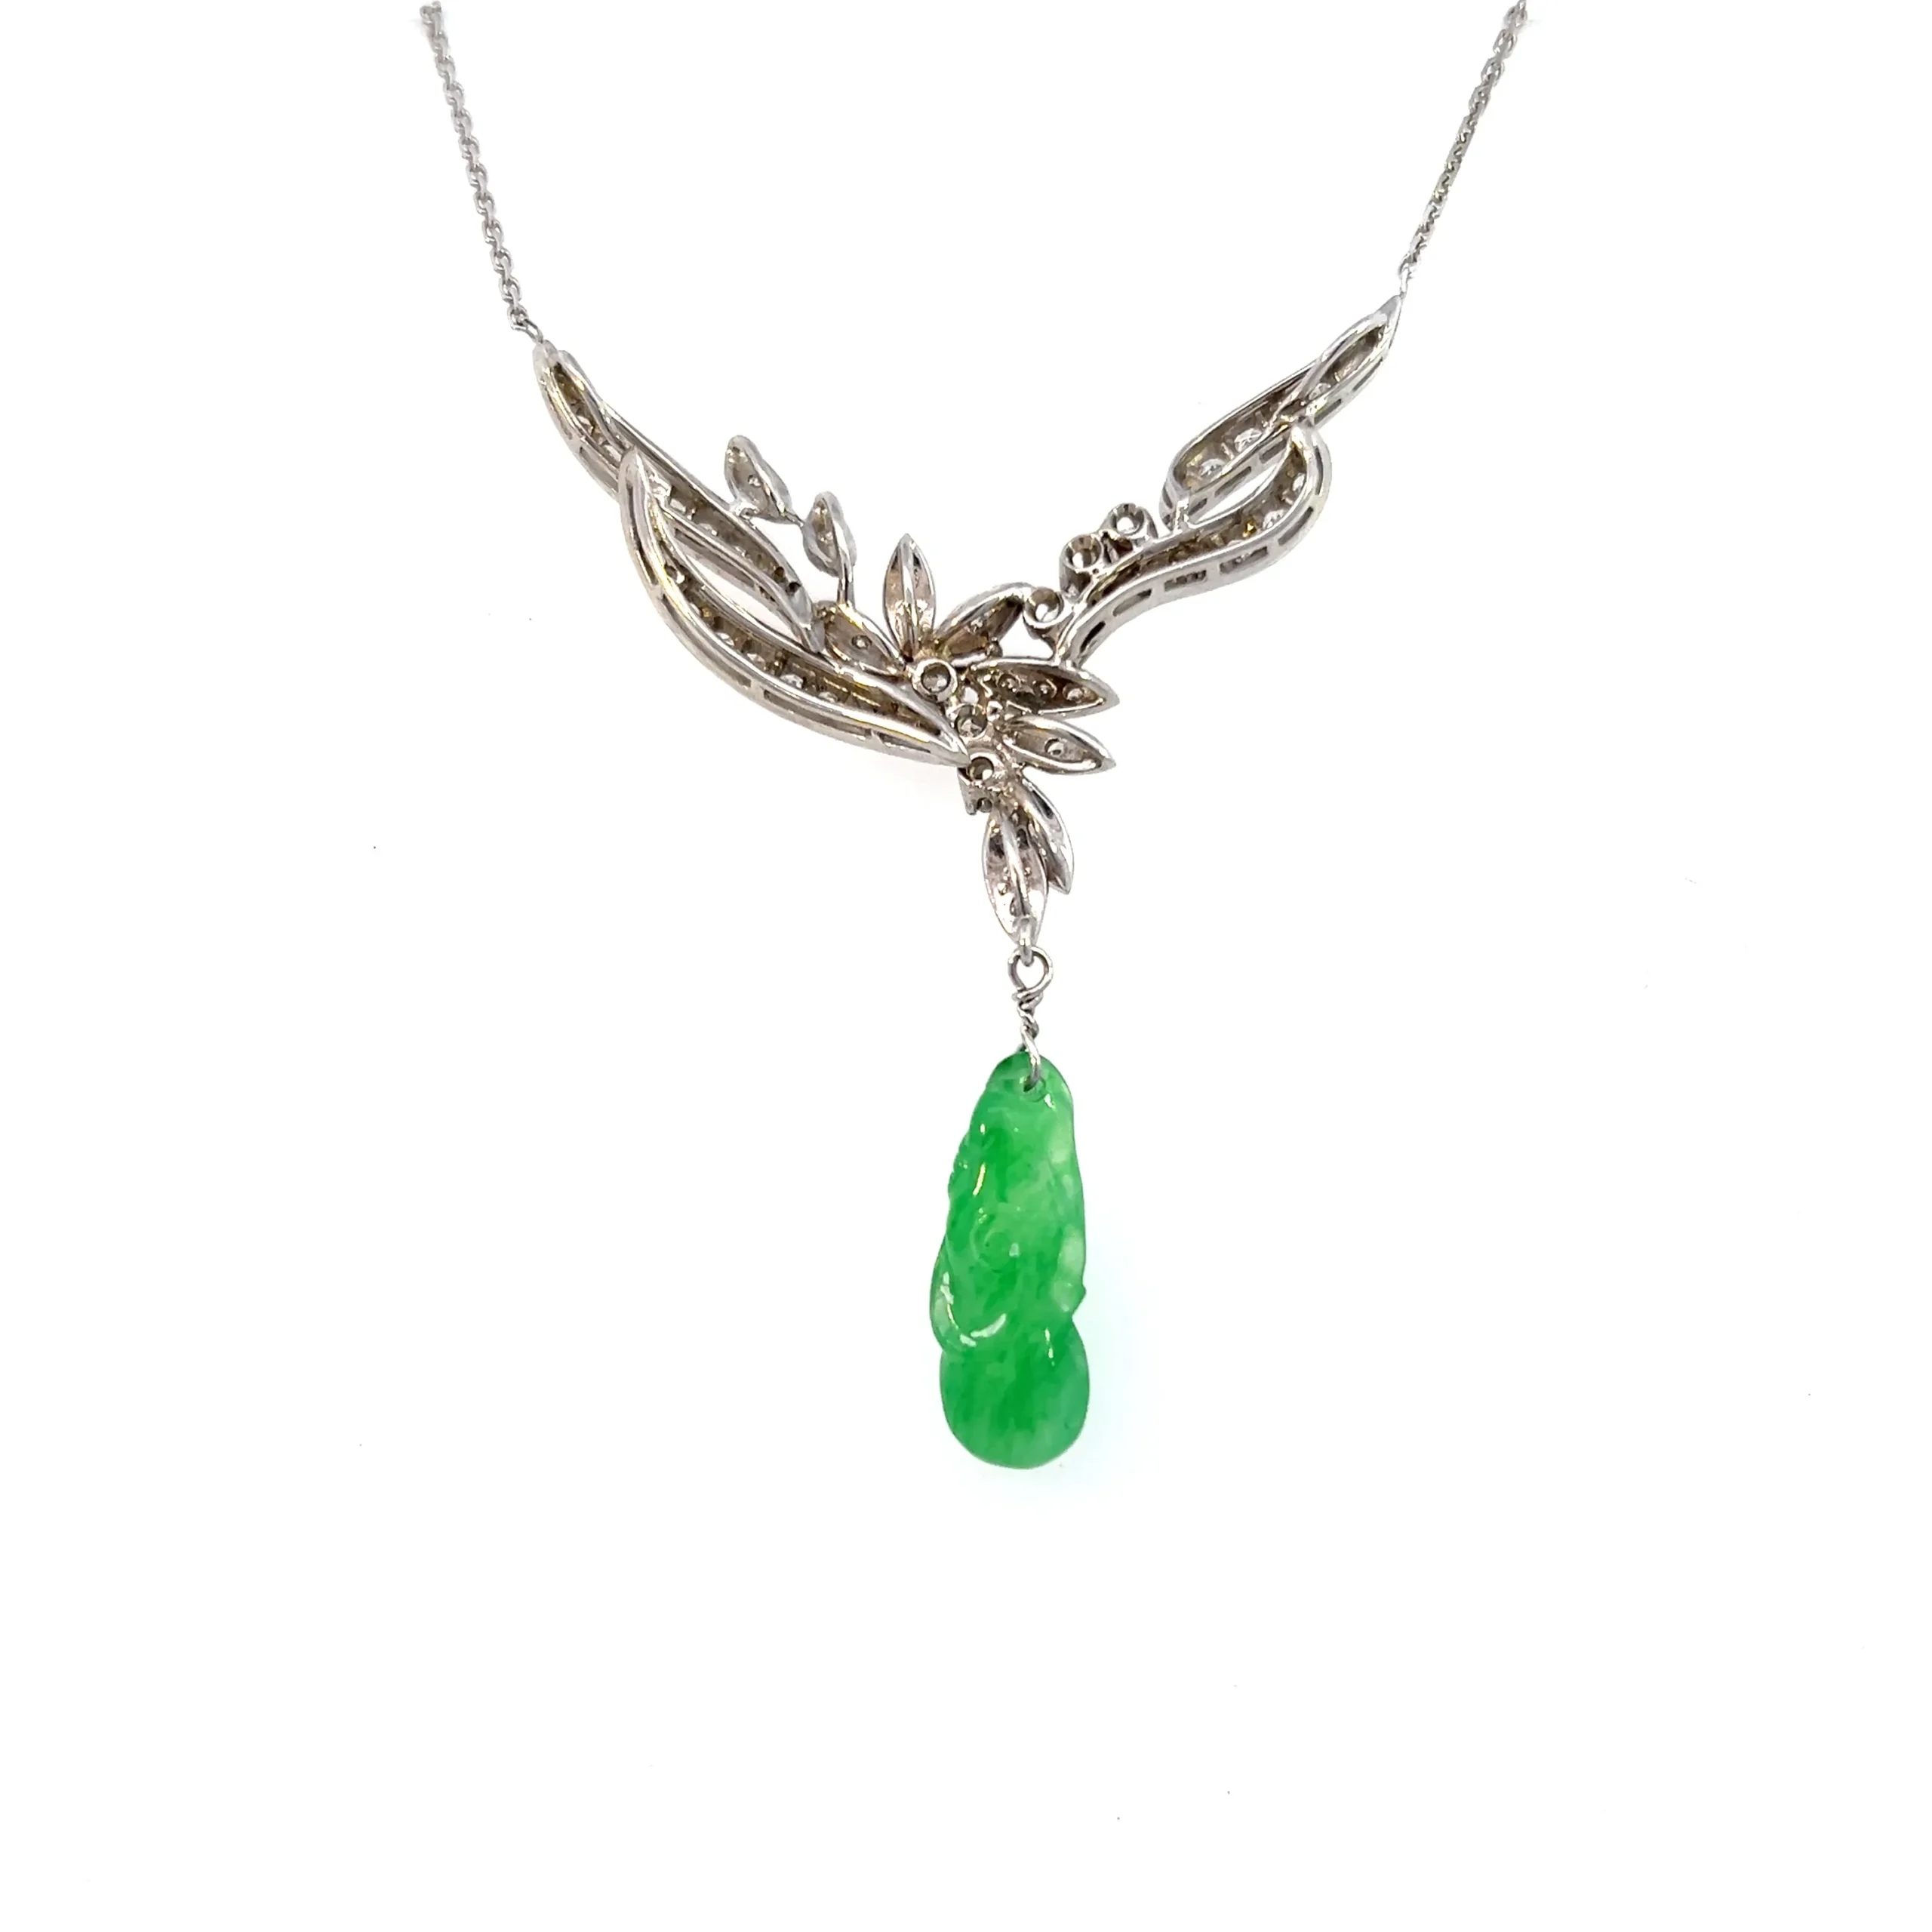 Estate Vintage 14K White Gold Necklace with a carved green jadeite dangle and round diamond accents in a nature-inspired design.